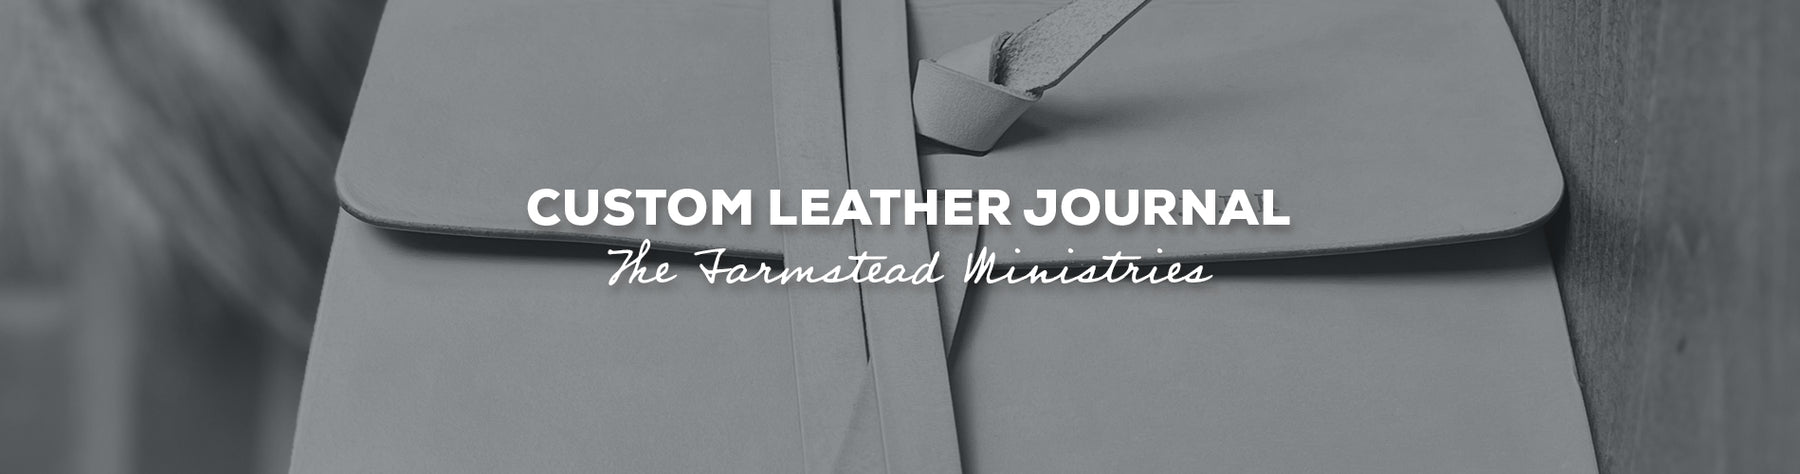 Gift Idea: Leather Journal with The Farmstead Ministries